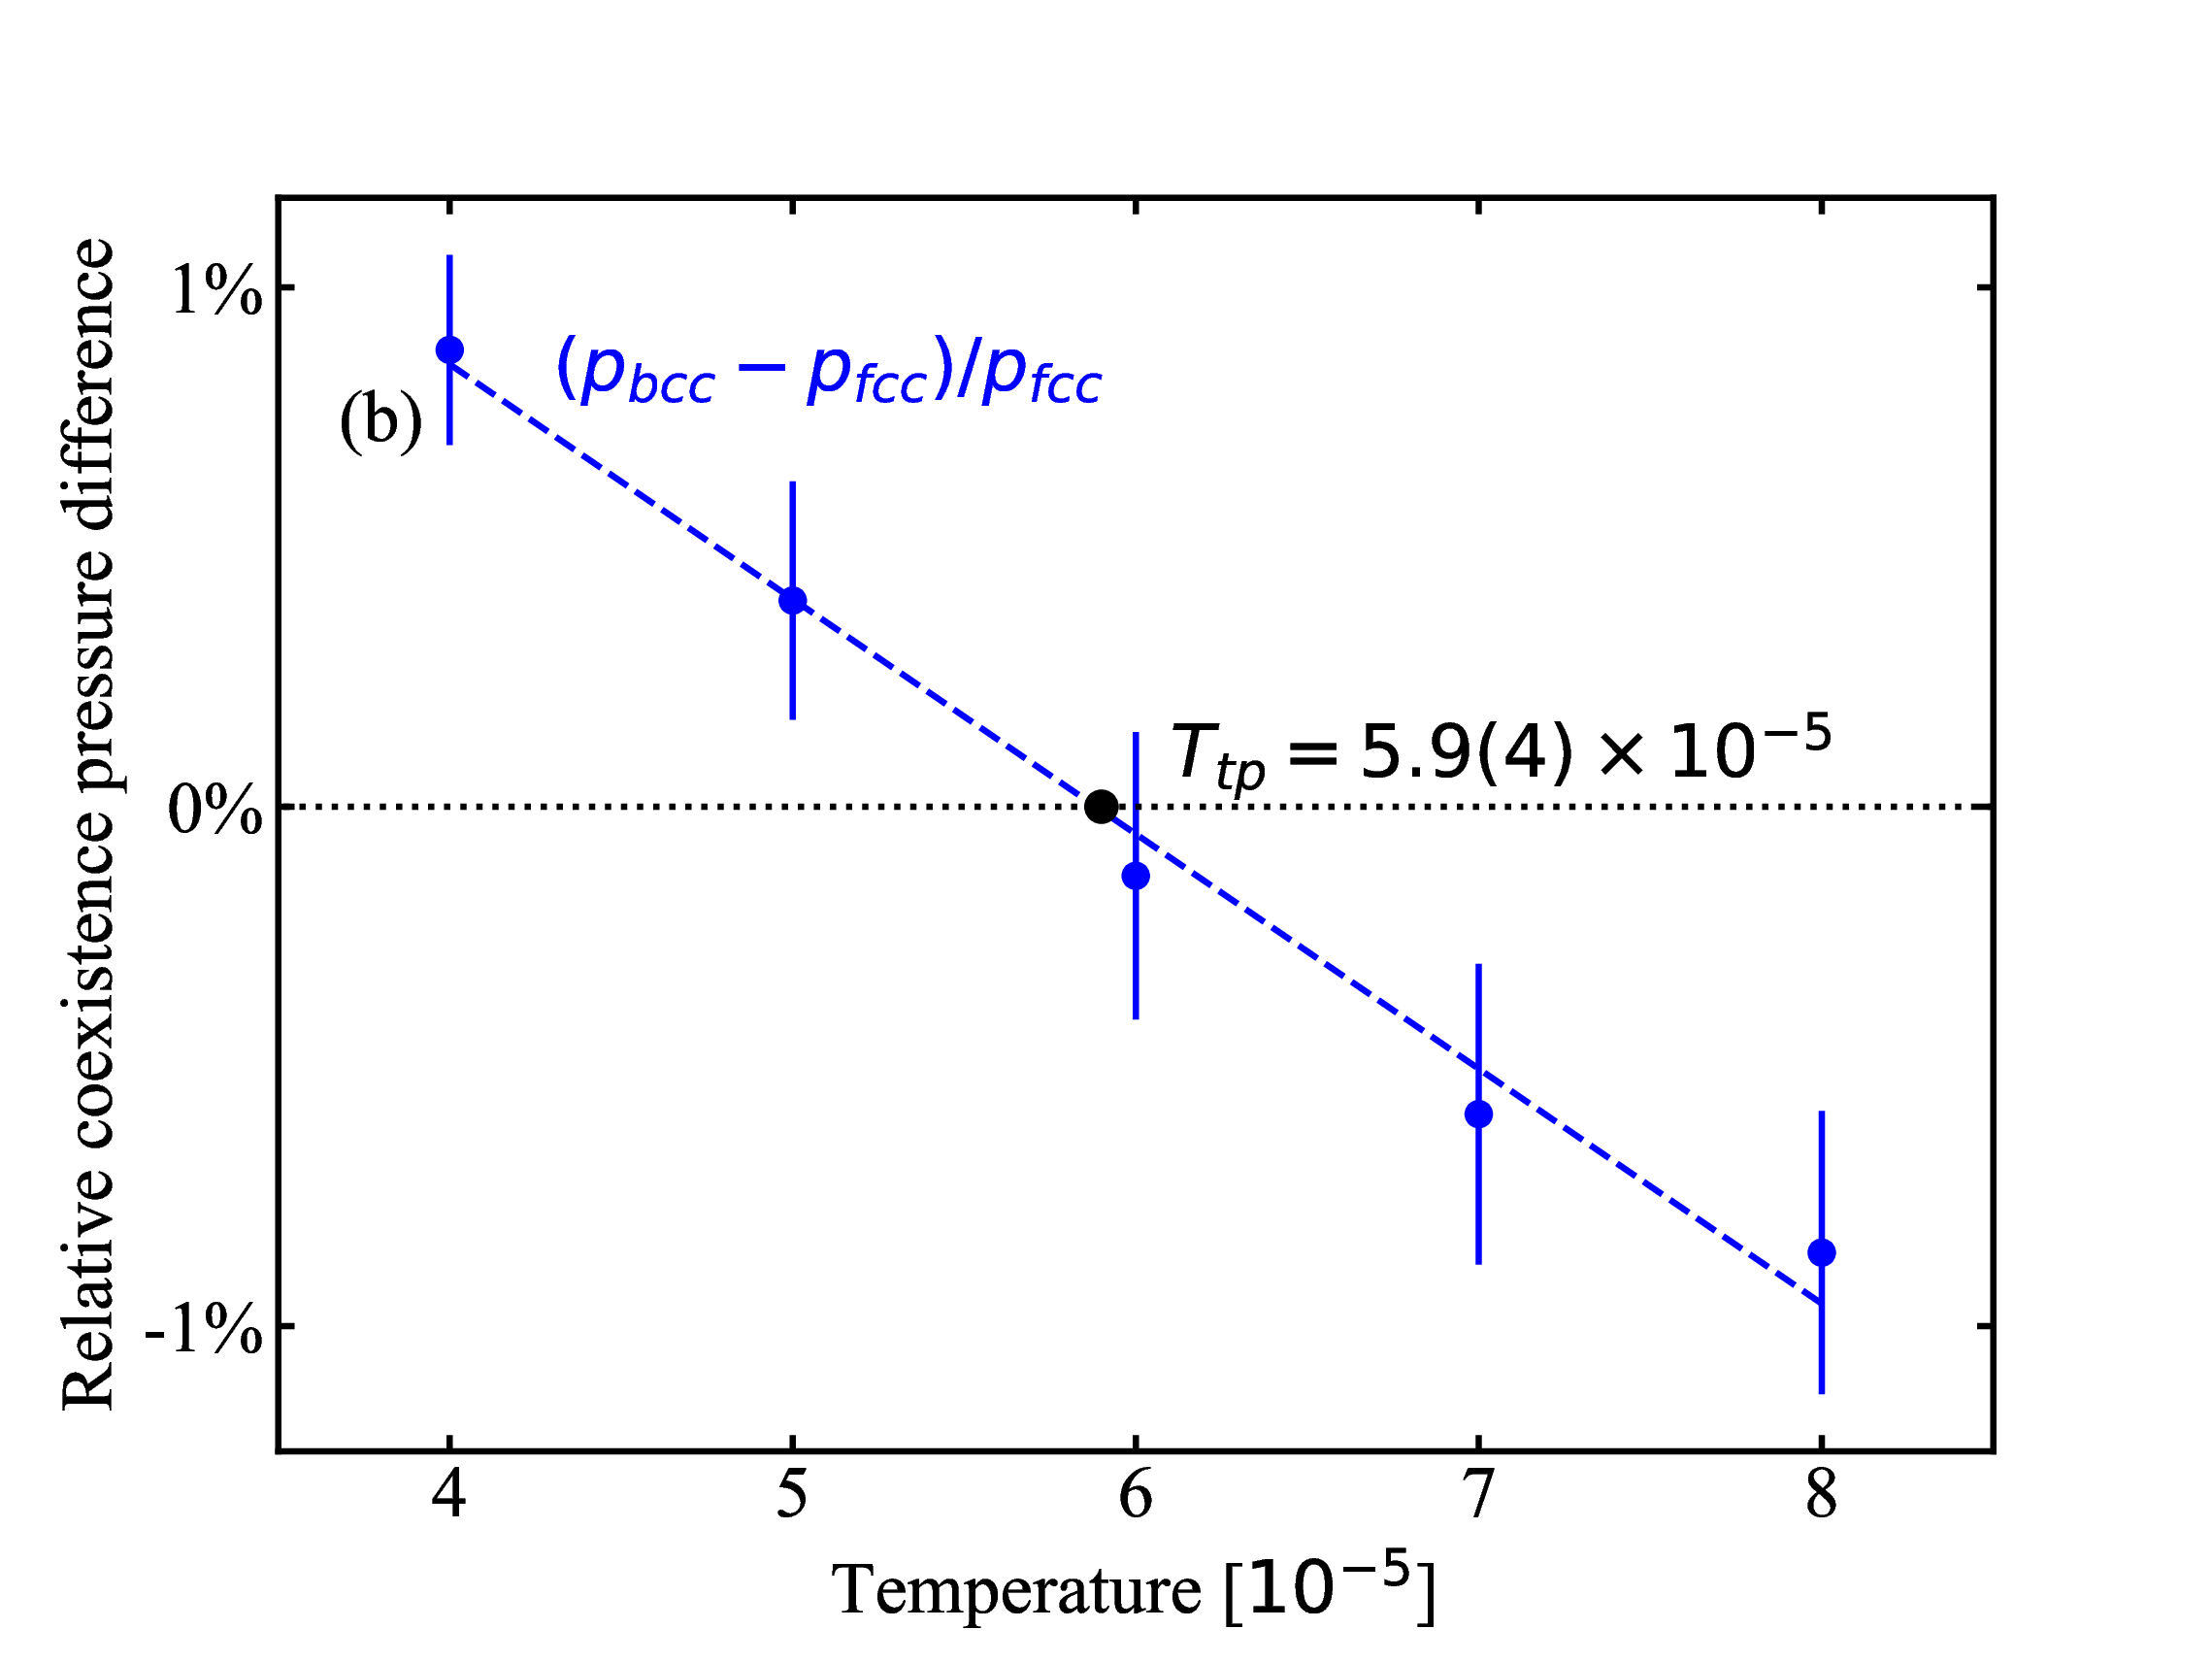 JCP_150_174501_2019_data/fig/fig6b.png